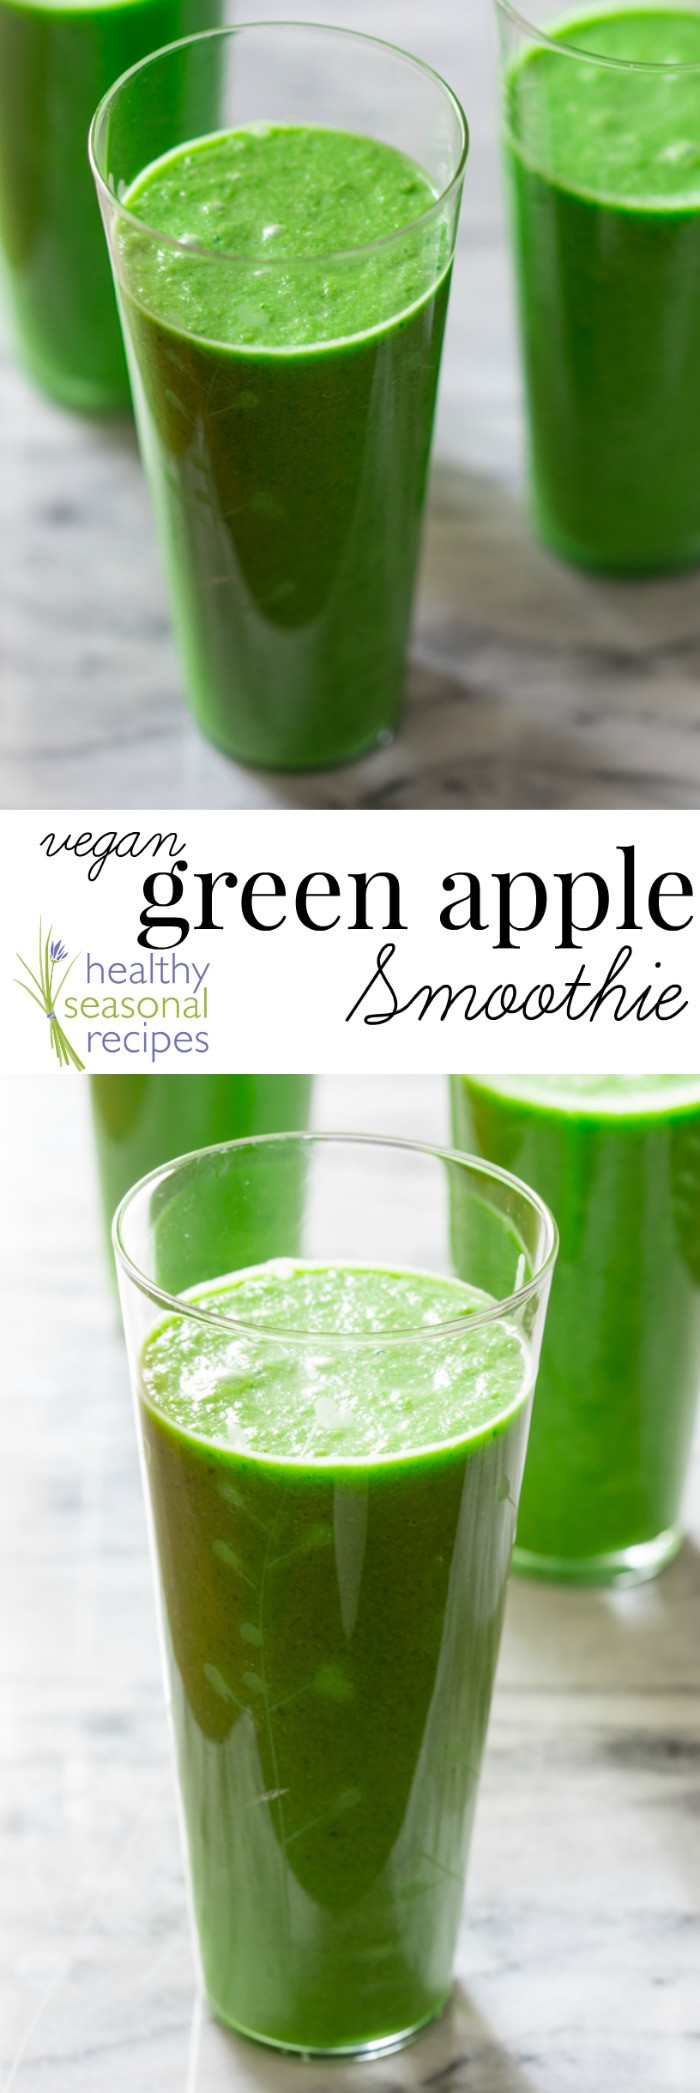 Are Green Smoothies Healthy
 green apple smoothie vegan paleo and gluten free